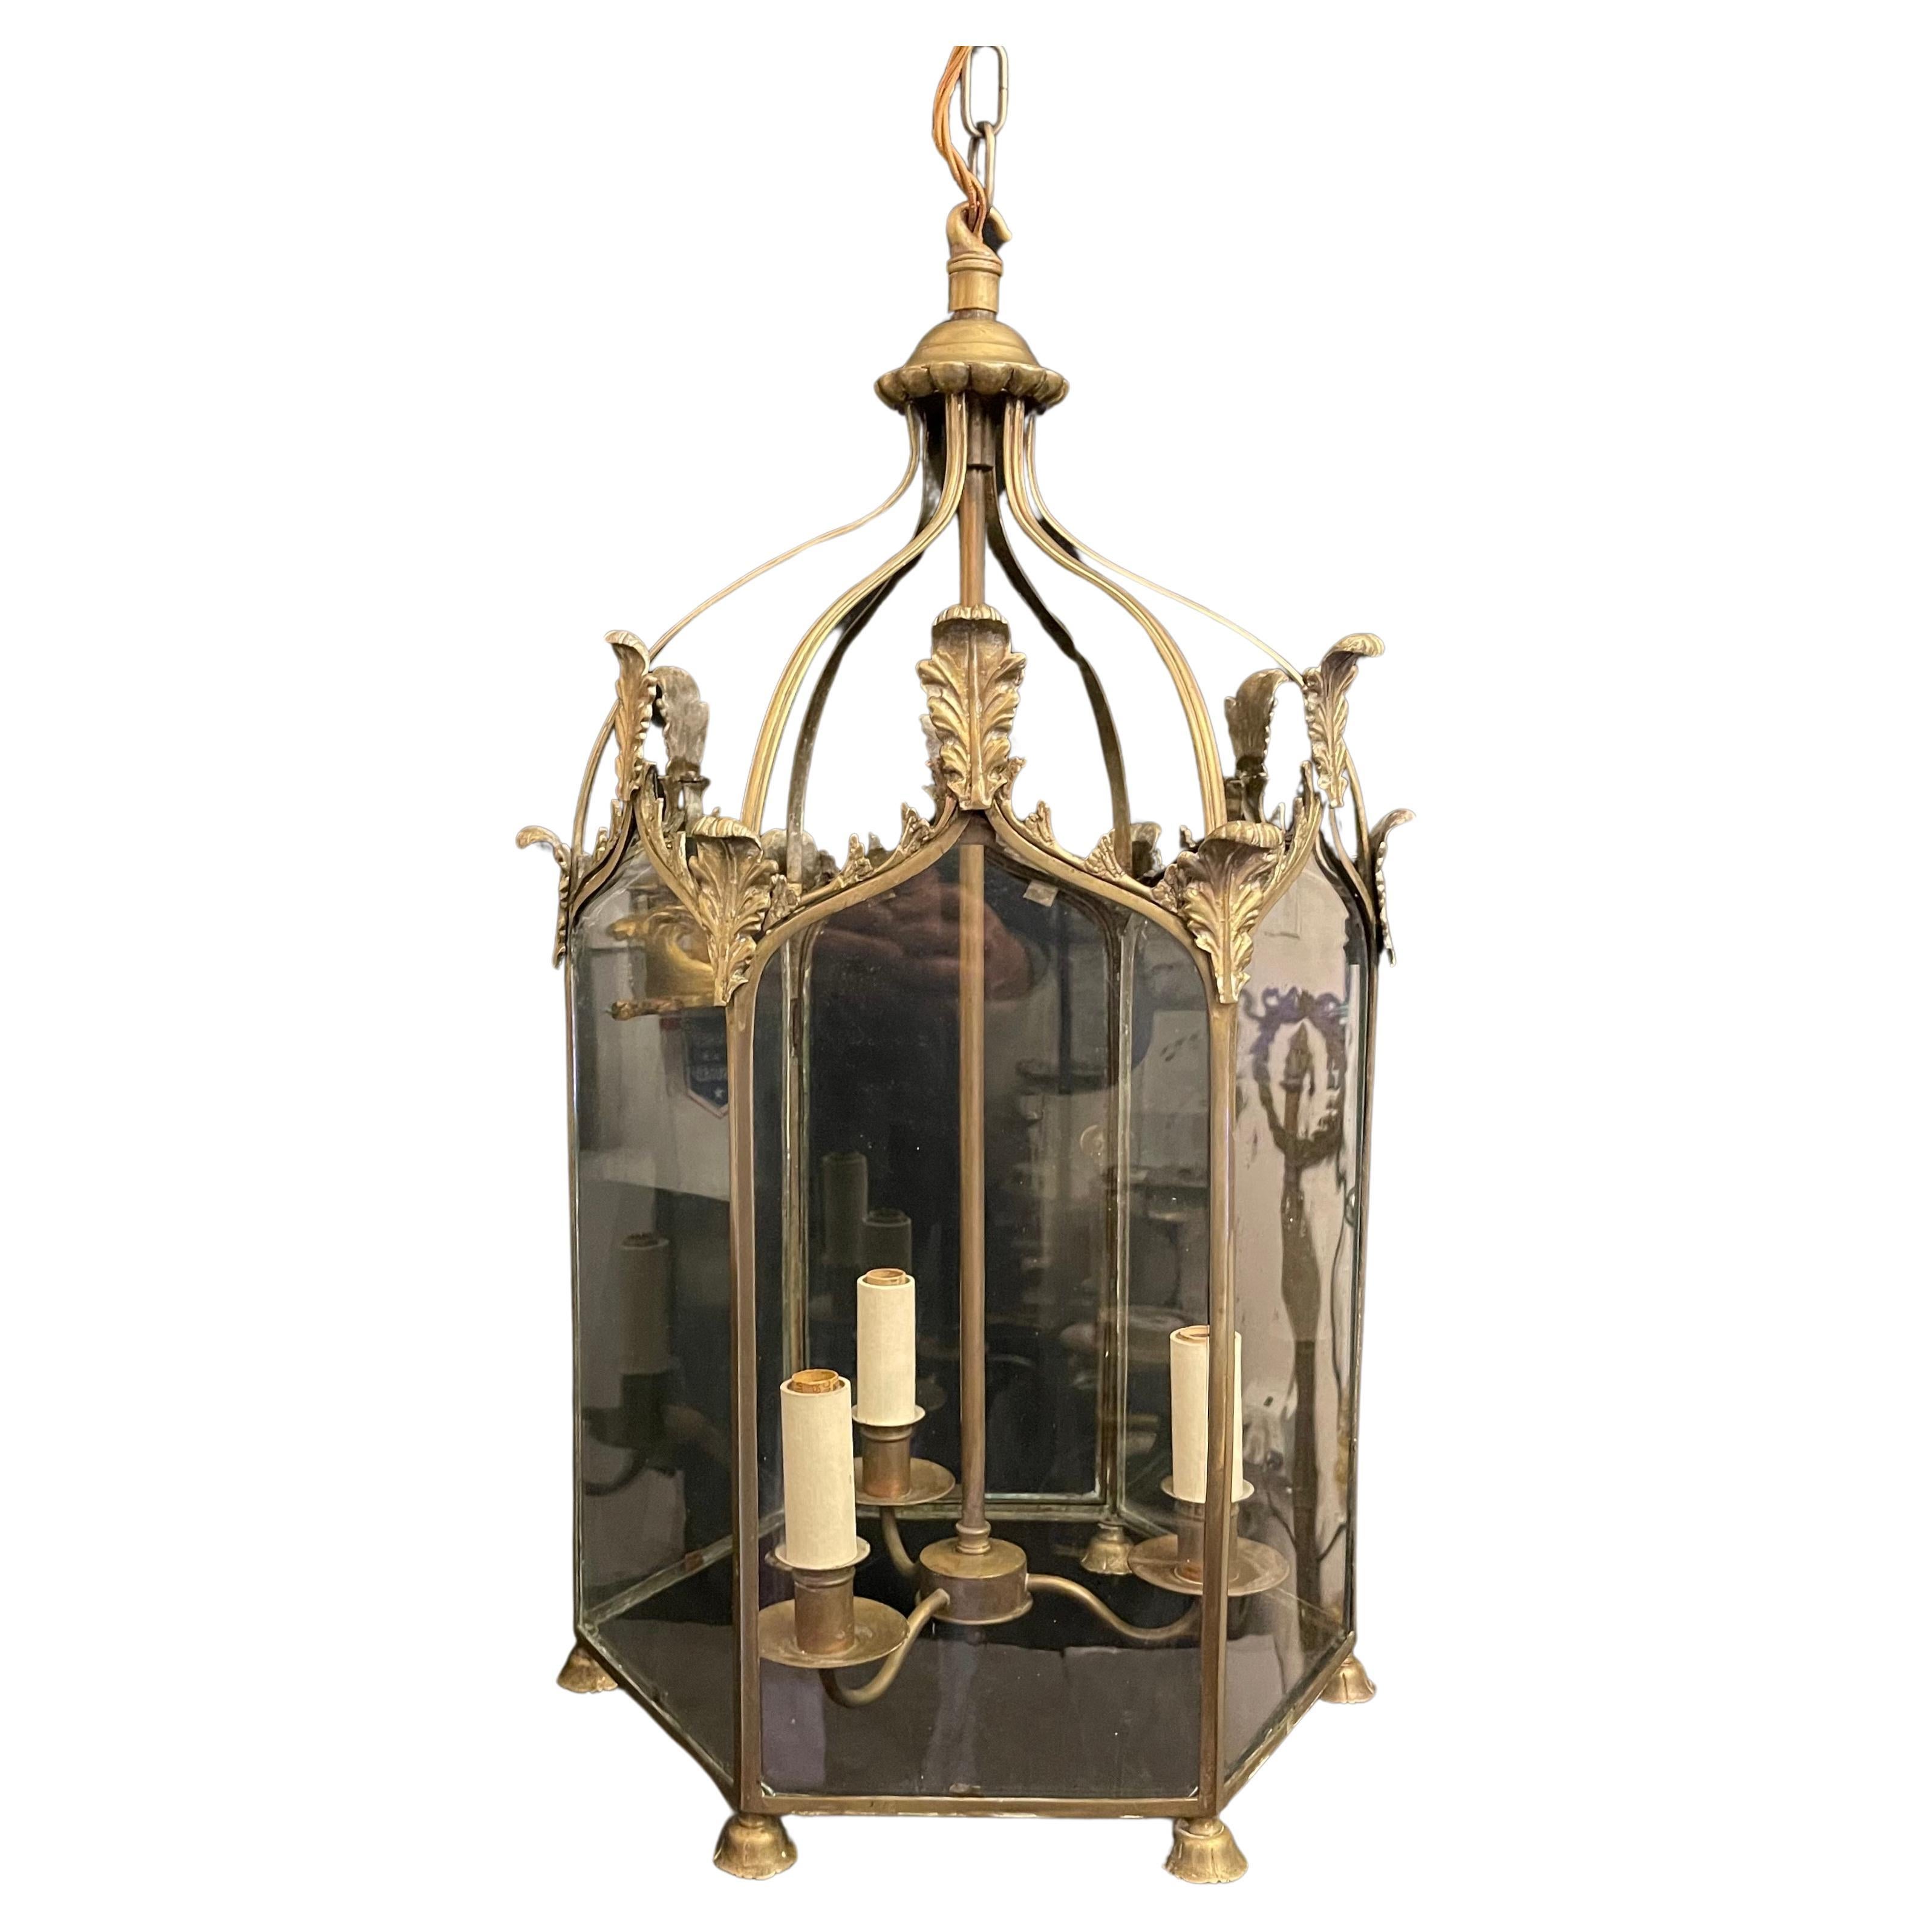 A Wonderful Vaughan lighting bronze / brass regency hall lantern, This Classic Lantern is Based On A 19th Century Six-Sided Fixture That Is Finished With Feathered Detailing And A Leaf-Like Top Coronet, With A 3 Light Cluster Inside, Accompanied By